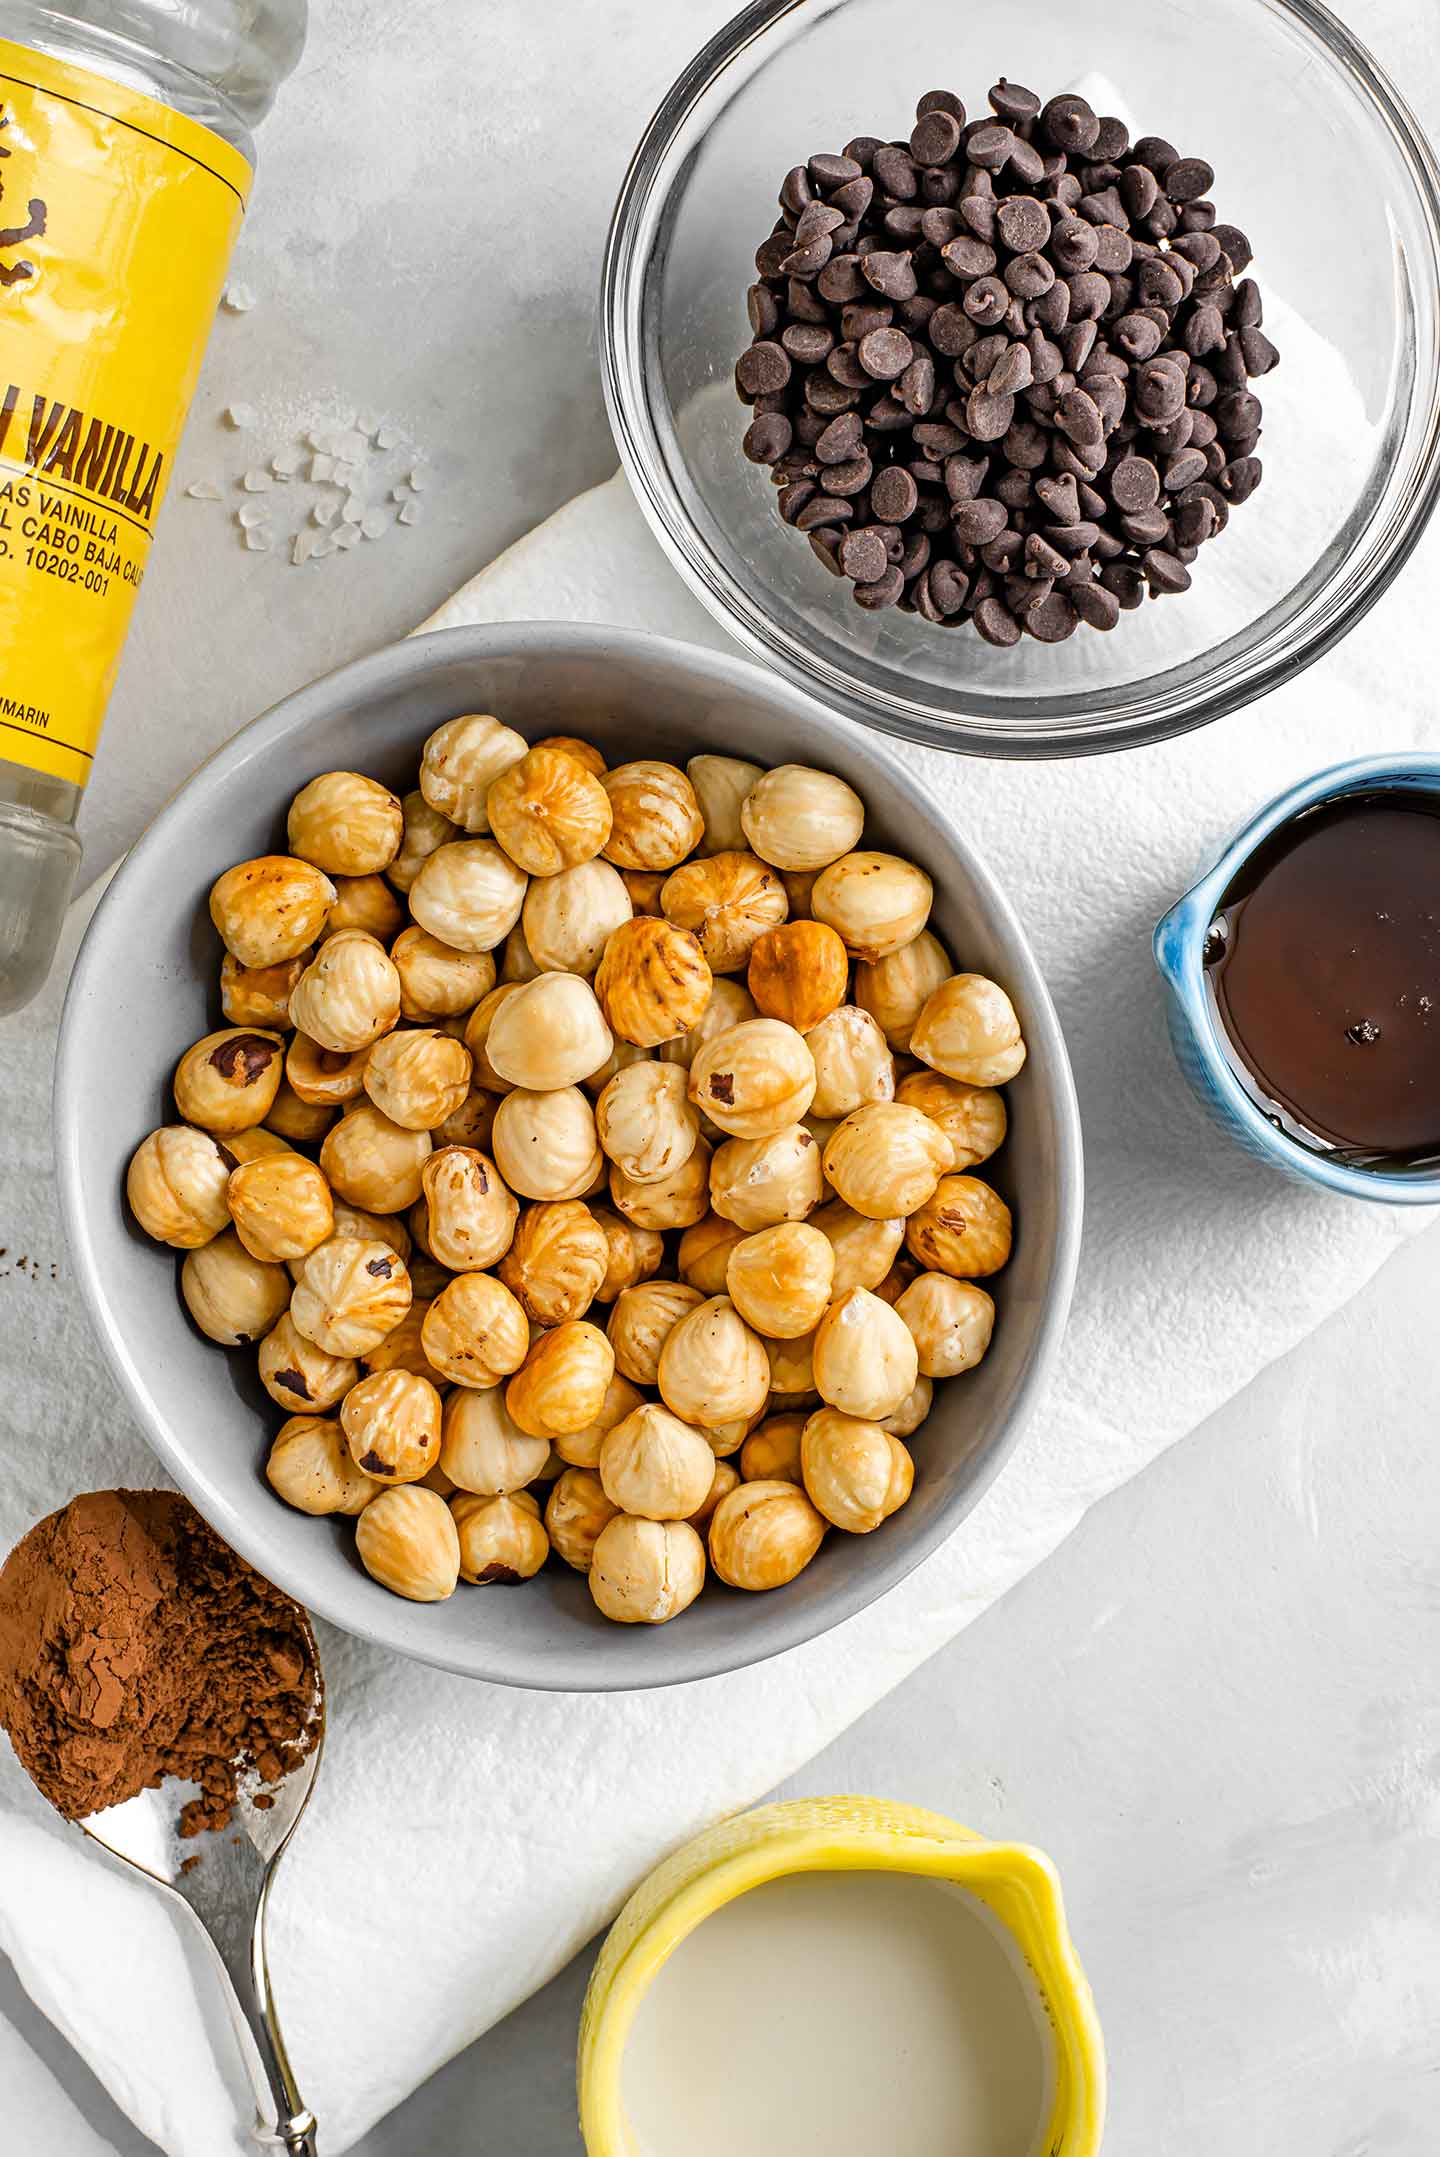 Top down view of roasted hazelnuts without their skins in a small bowl with chocolate chips, maple syrup, cocoa powder, vanilla extract, and sea salt displayed around.